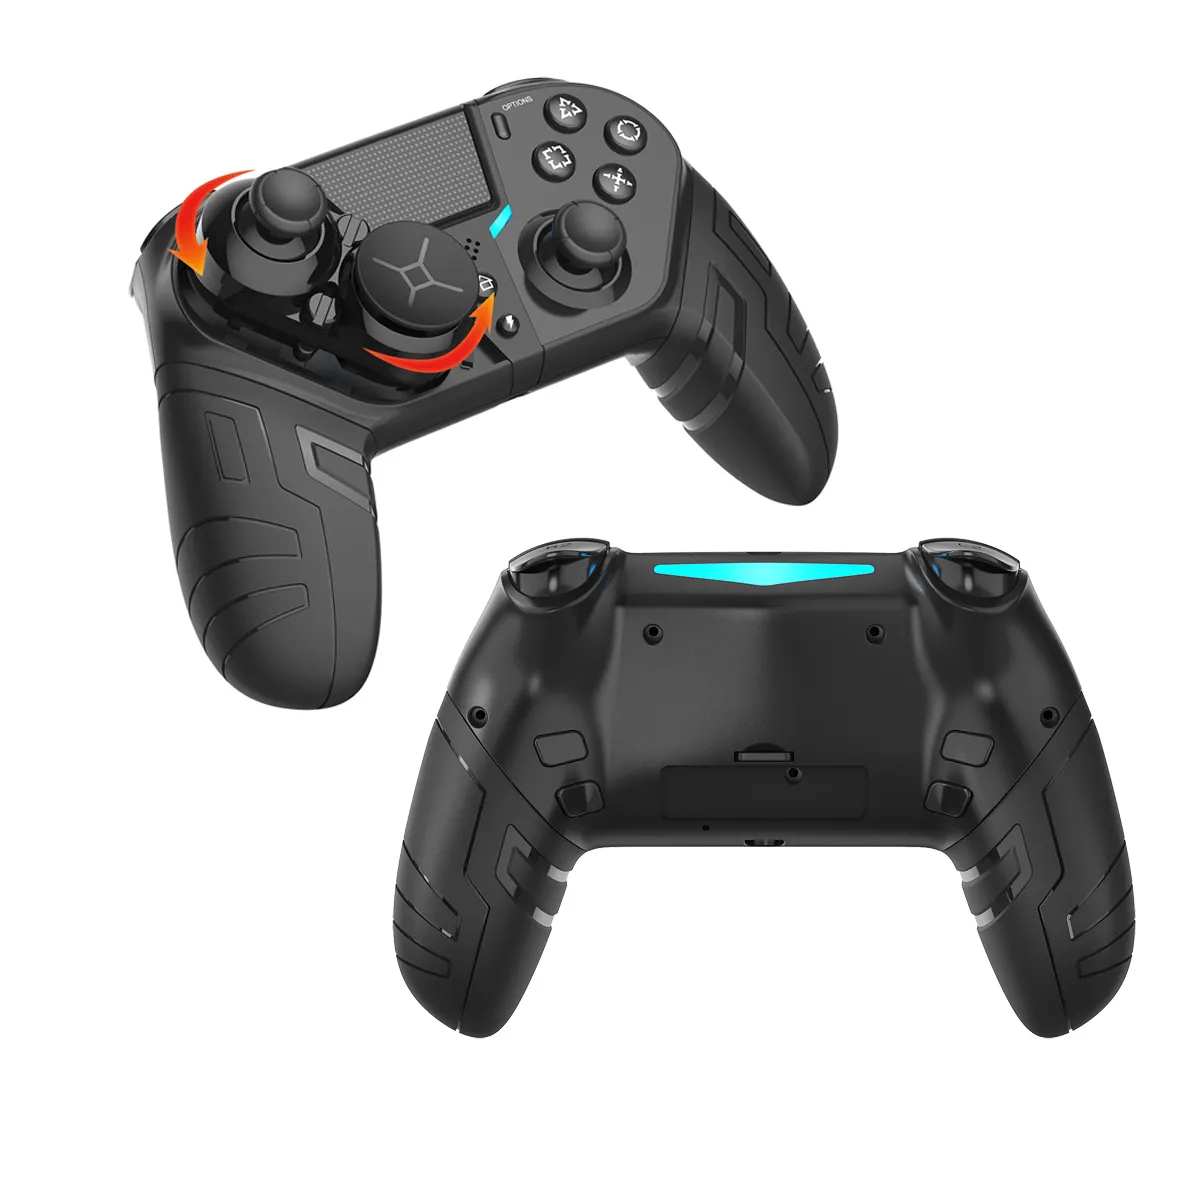 wireless joystick gamepad controller for Sony Playstation PS4 pro IOS Android Computer PC with paddles